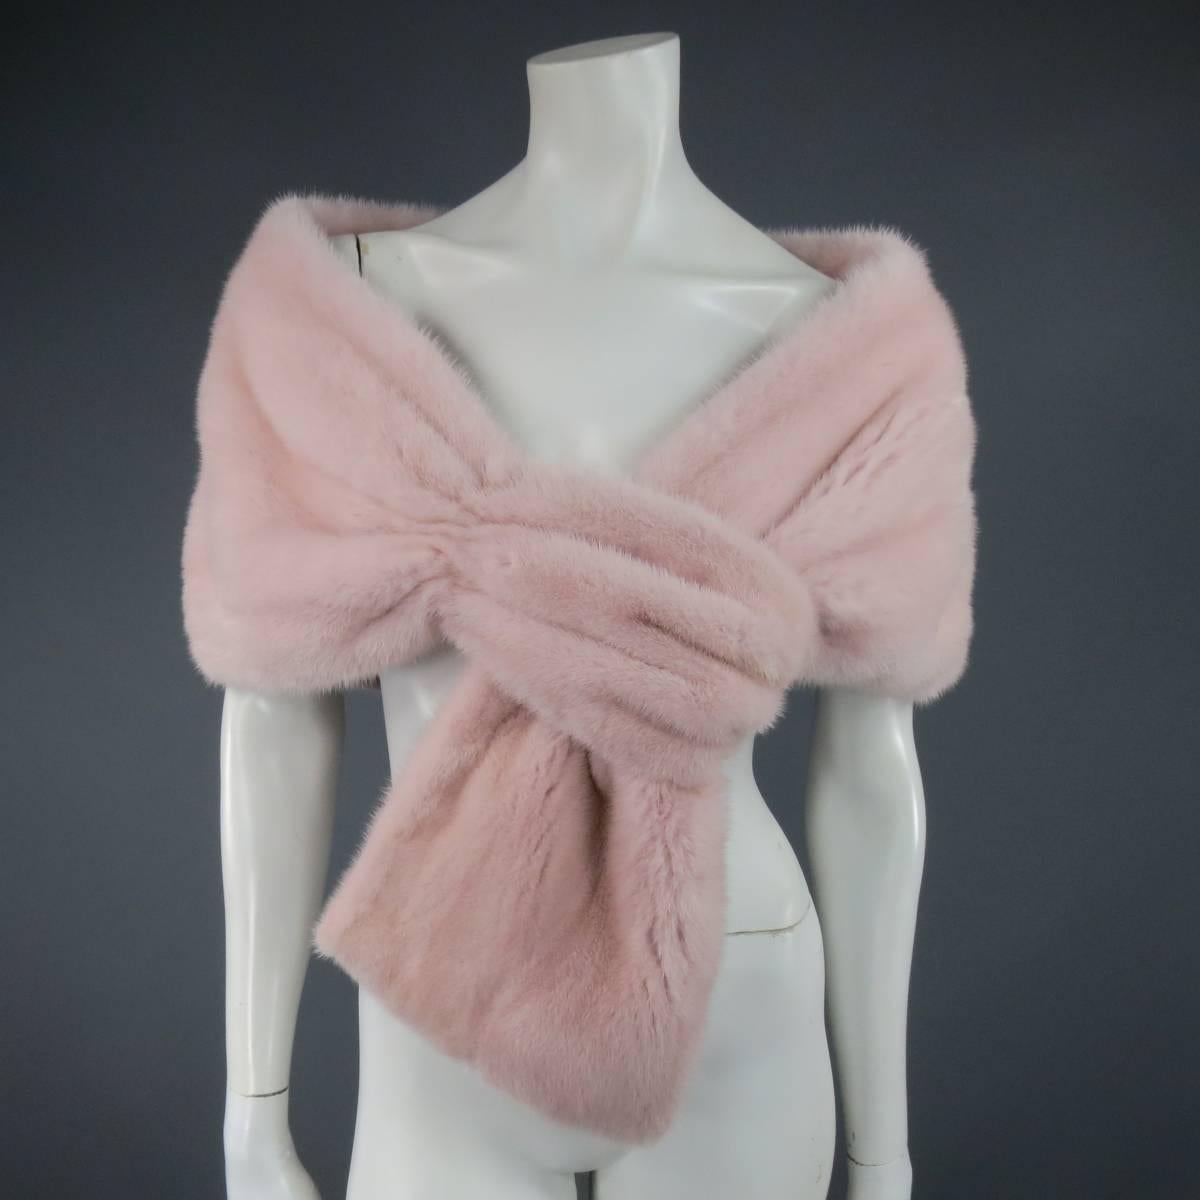 Fabulous MONIQUE LHUILLIER wrap stole in dusty rose pink soft mink fur with gathered loop end and silk lining. Made in USA.
 
Excellent Pre-Owned Condition.
 
Measurements:
 
Length: 58 in.
Width: 14 in.
End Width: 9 in.